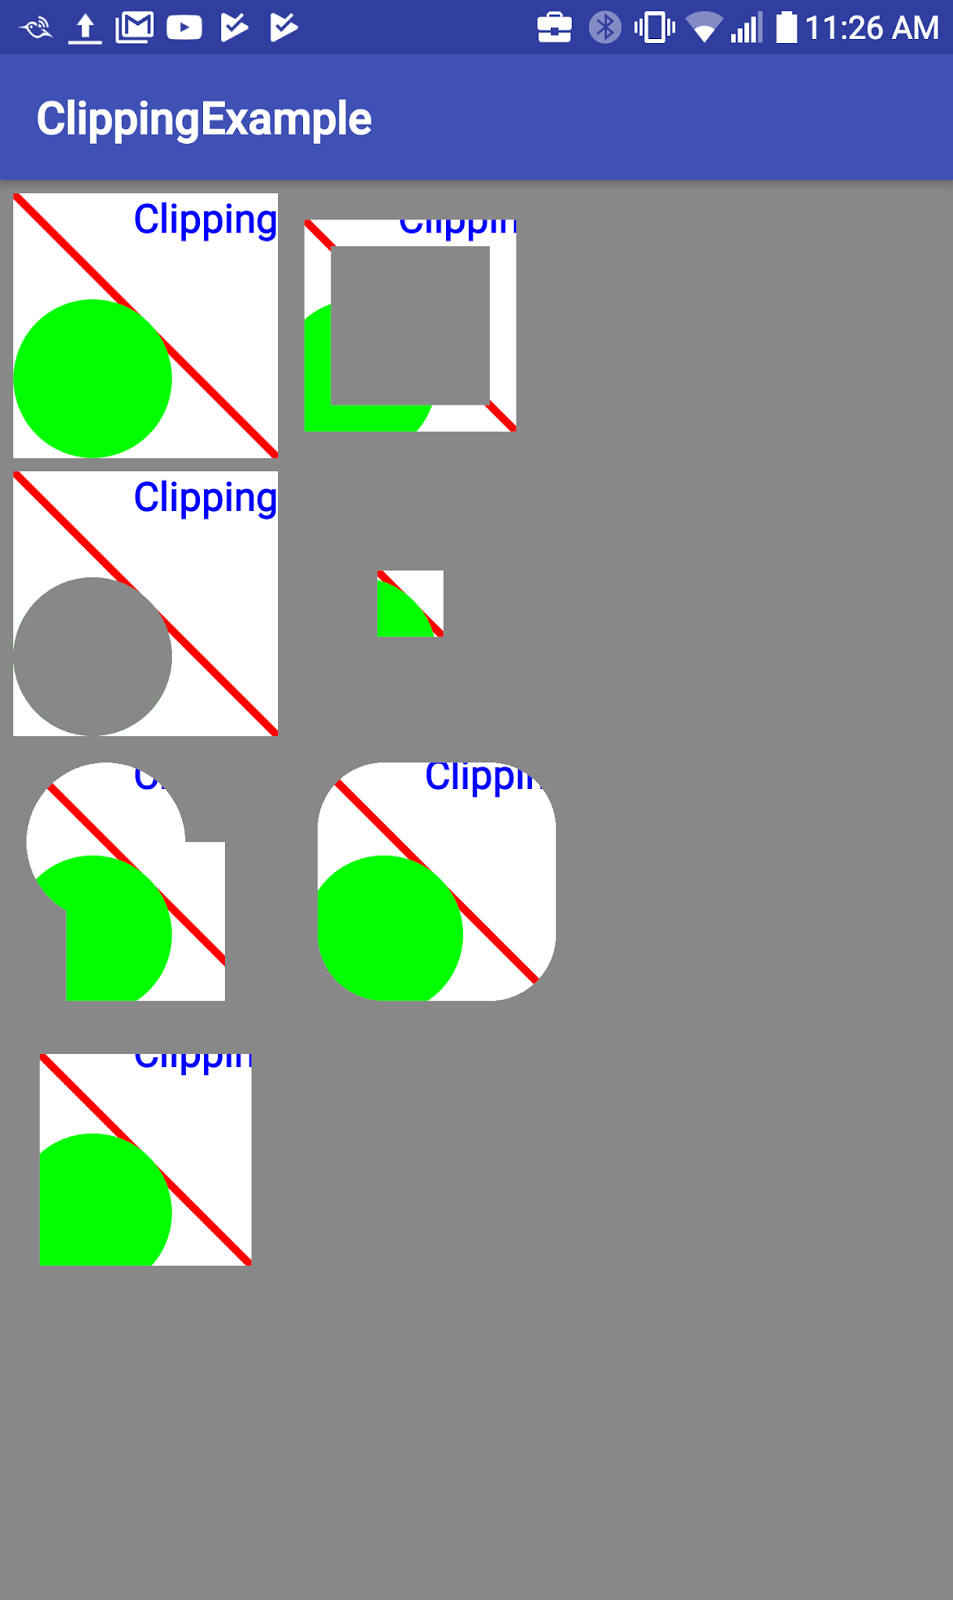  Clipping rectangle for one square